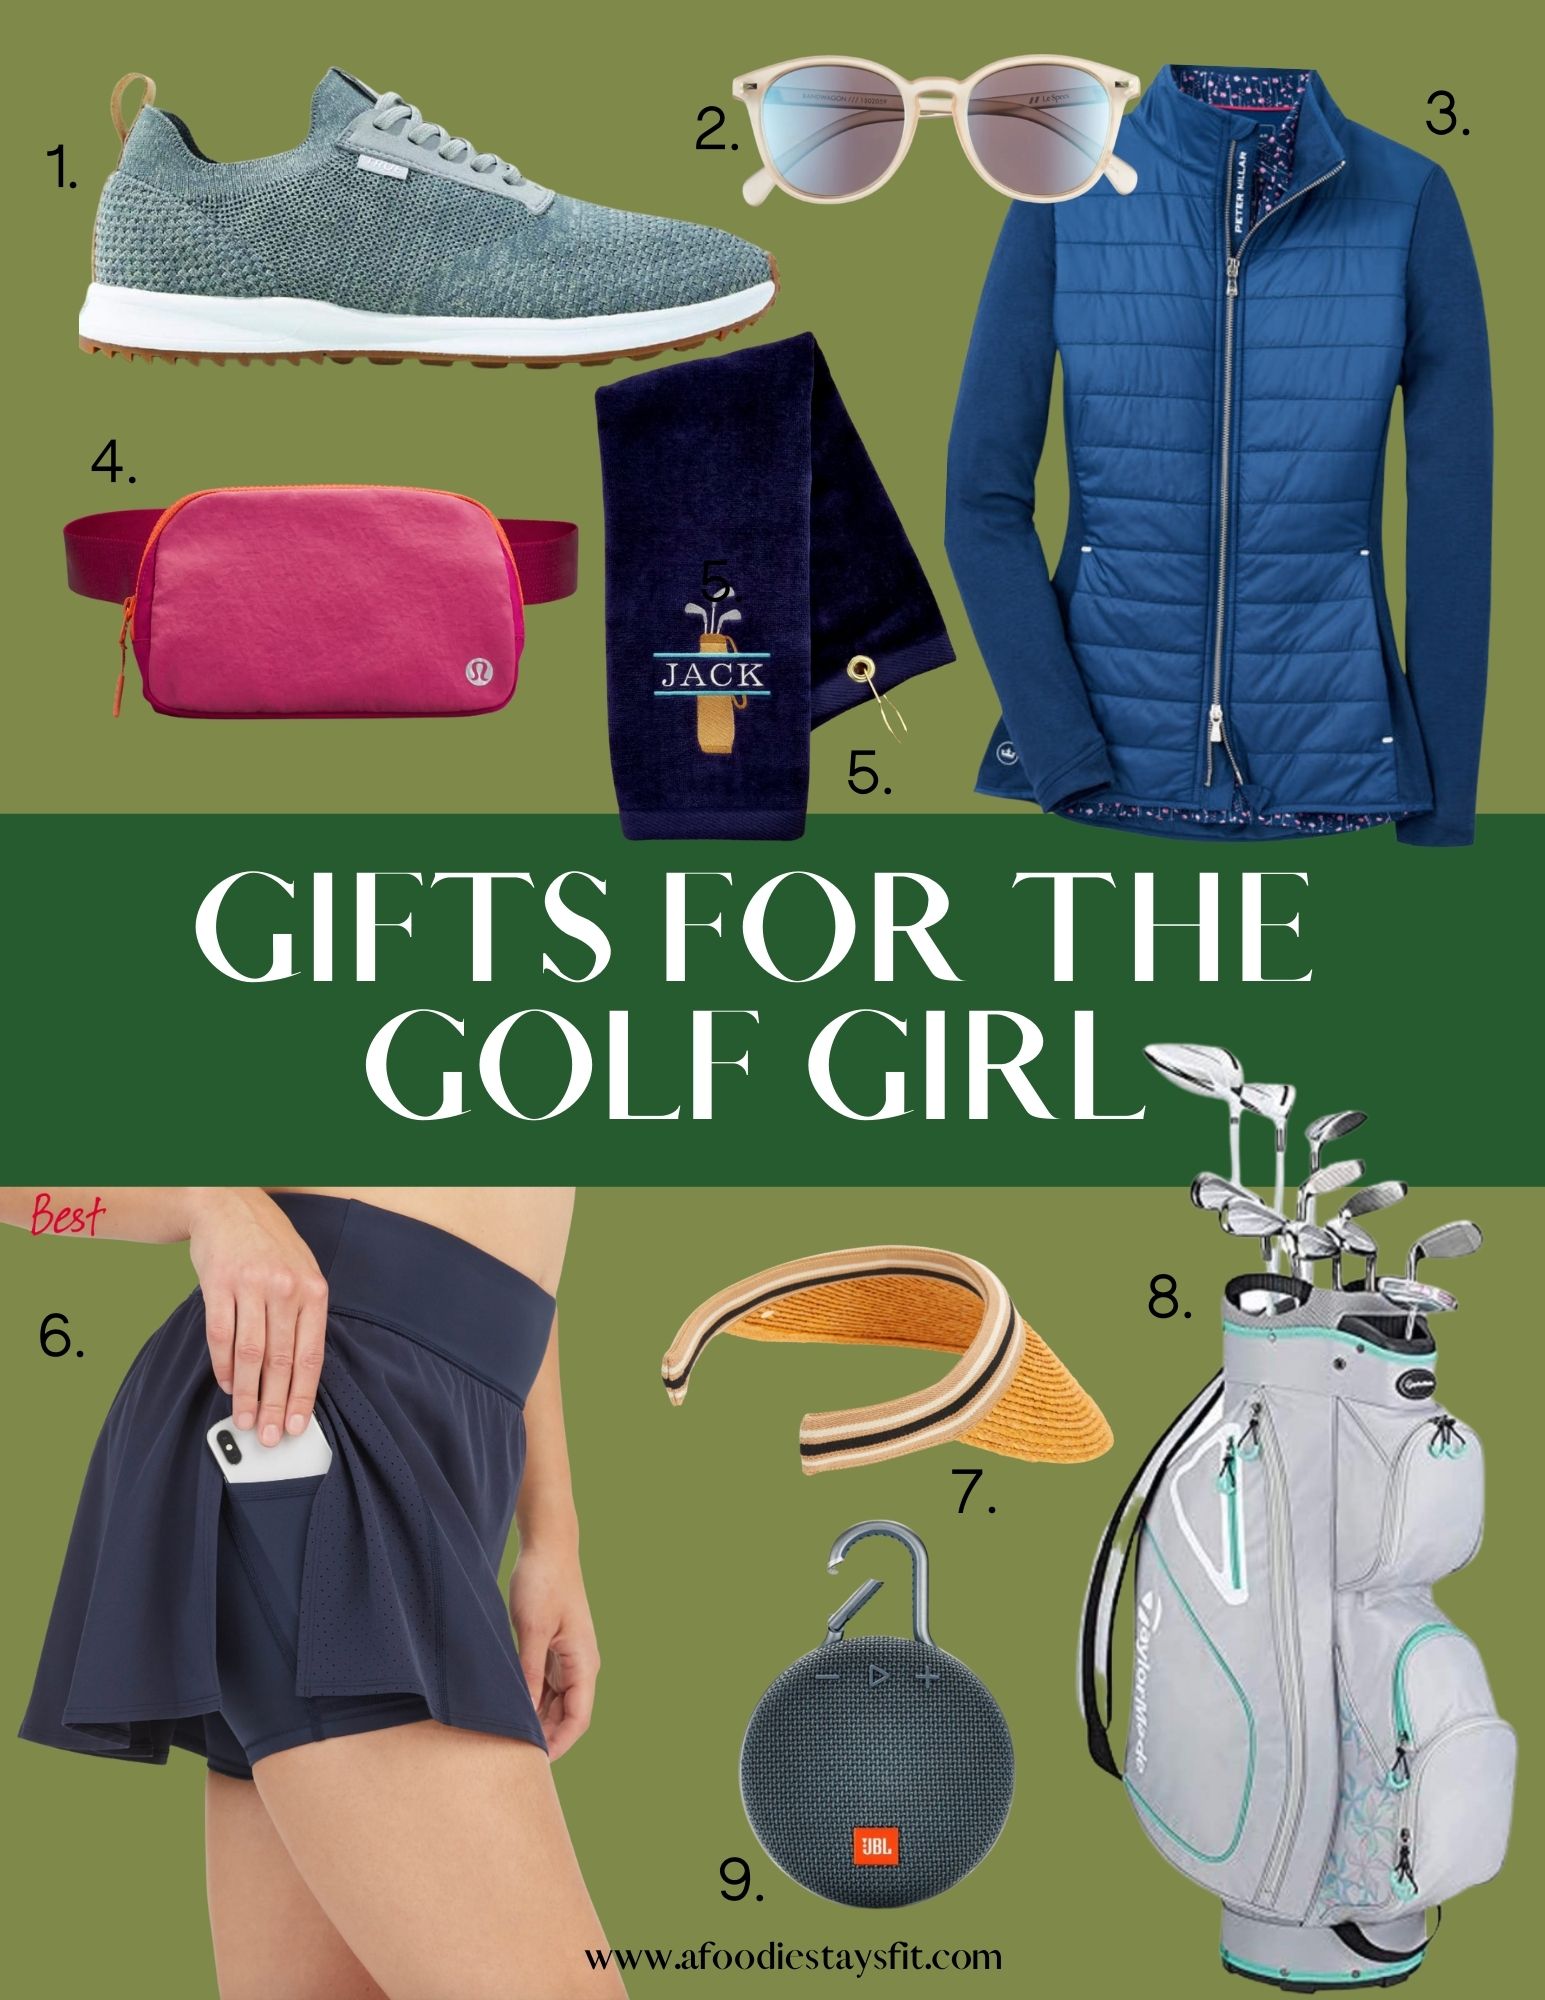 Gifts for the Golf Girl